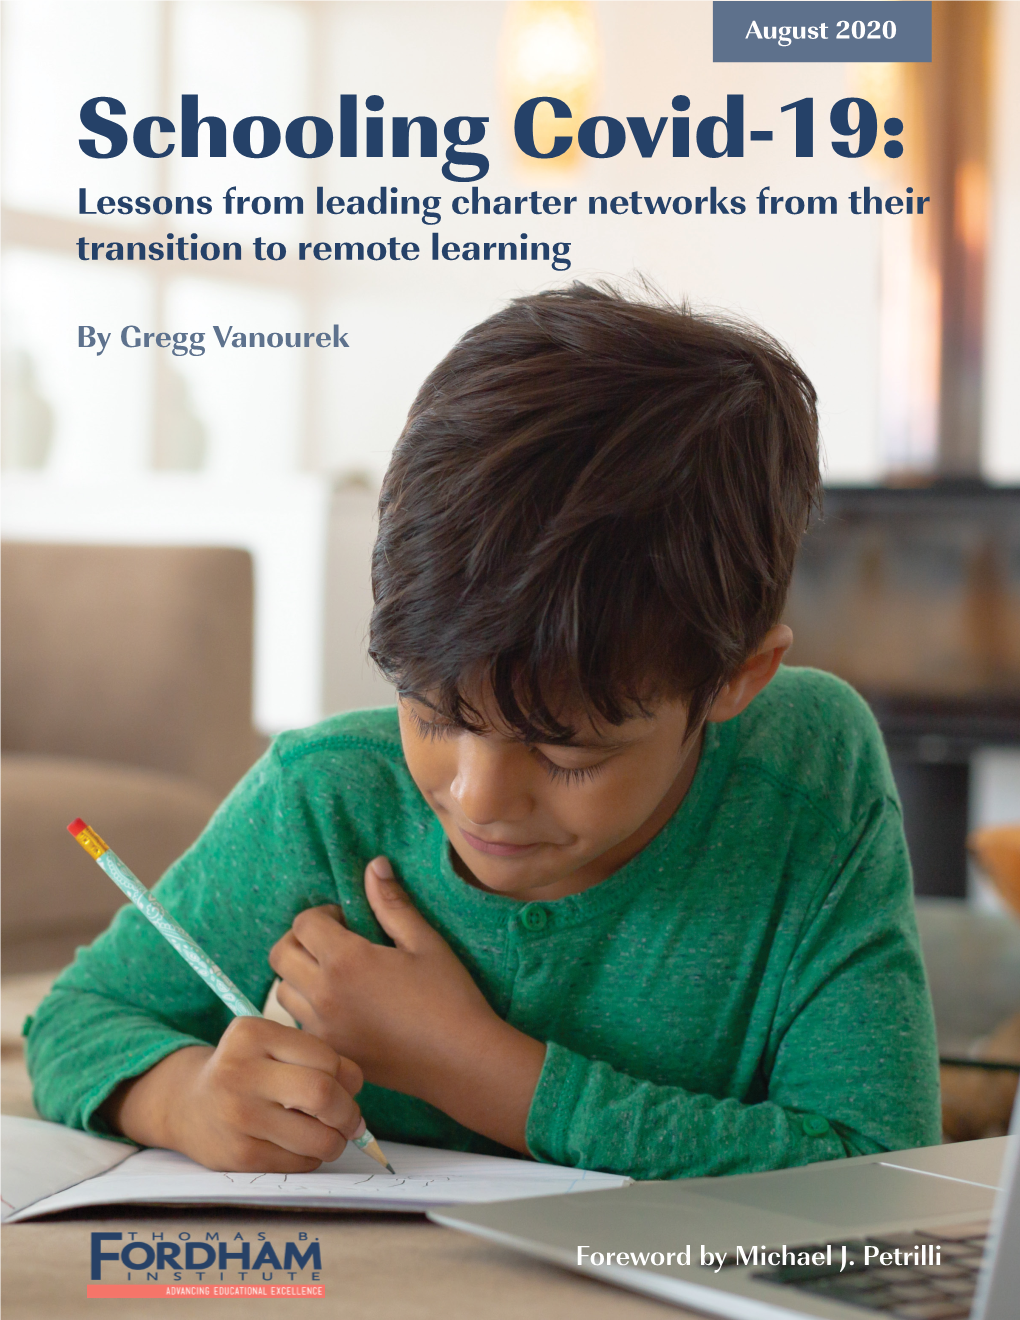 Schooling Covid-19: Lessons from Leading Charter Networks from Their Transition to Remote Learning